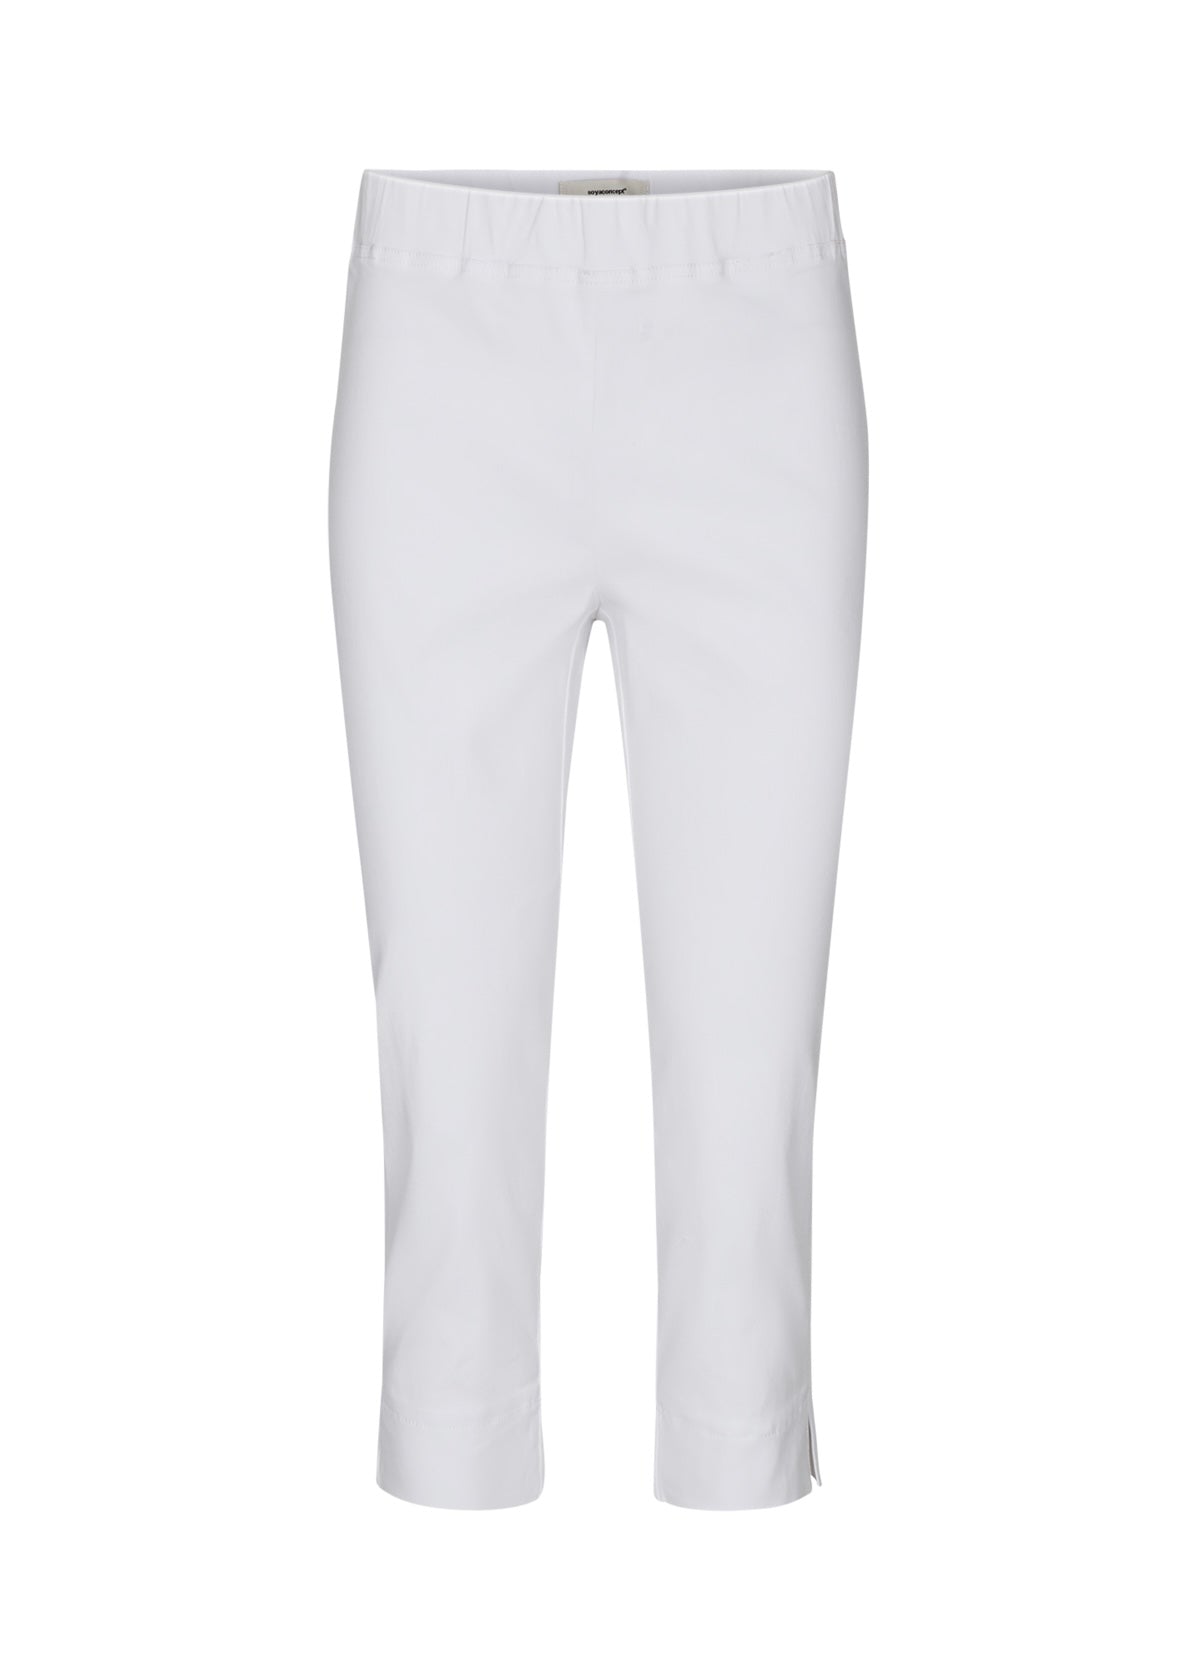 Soyaconcept Lilly 26 3/4 Pant - White*